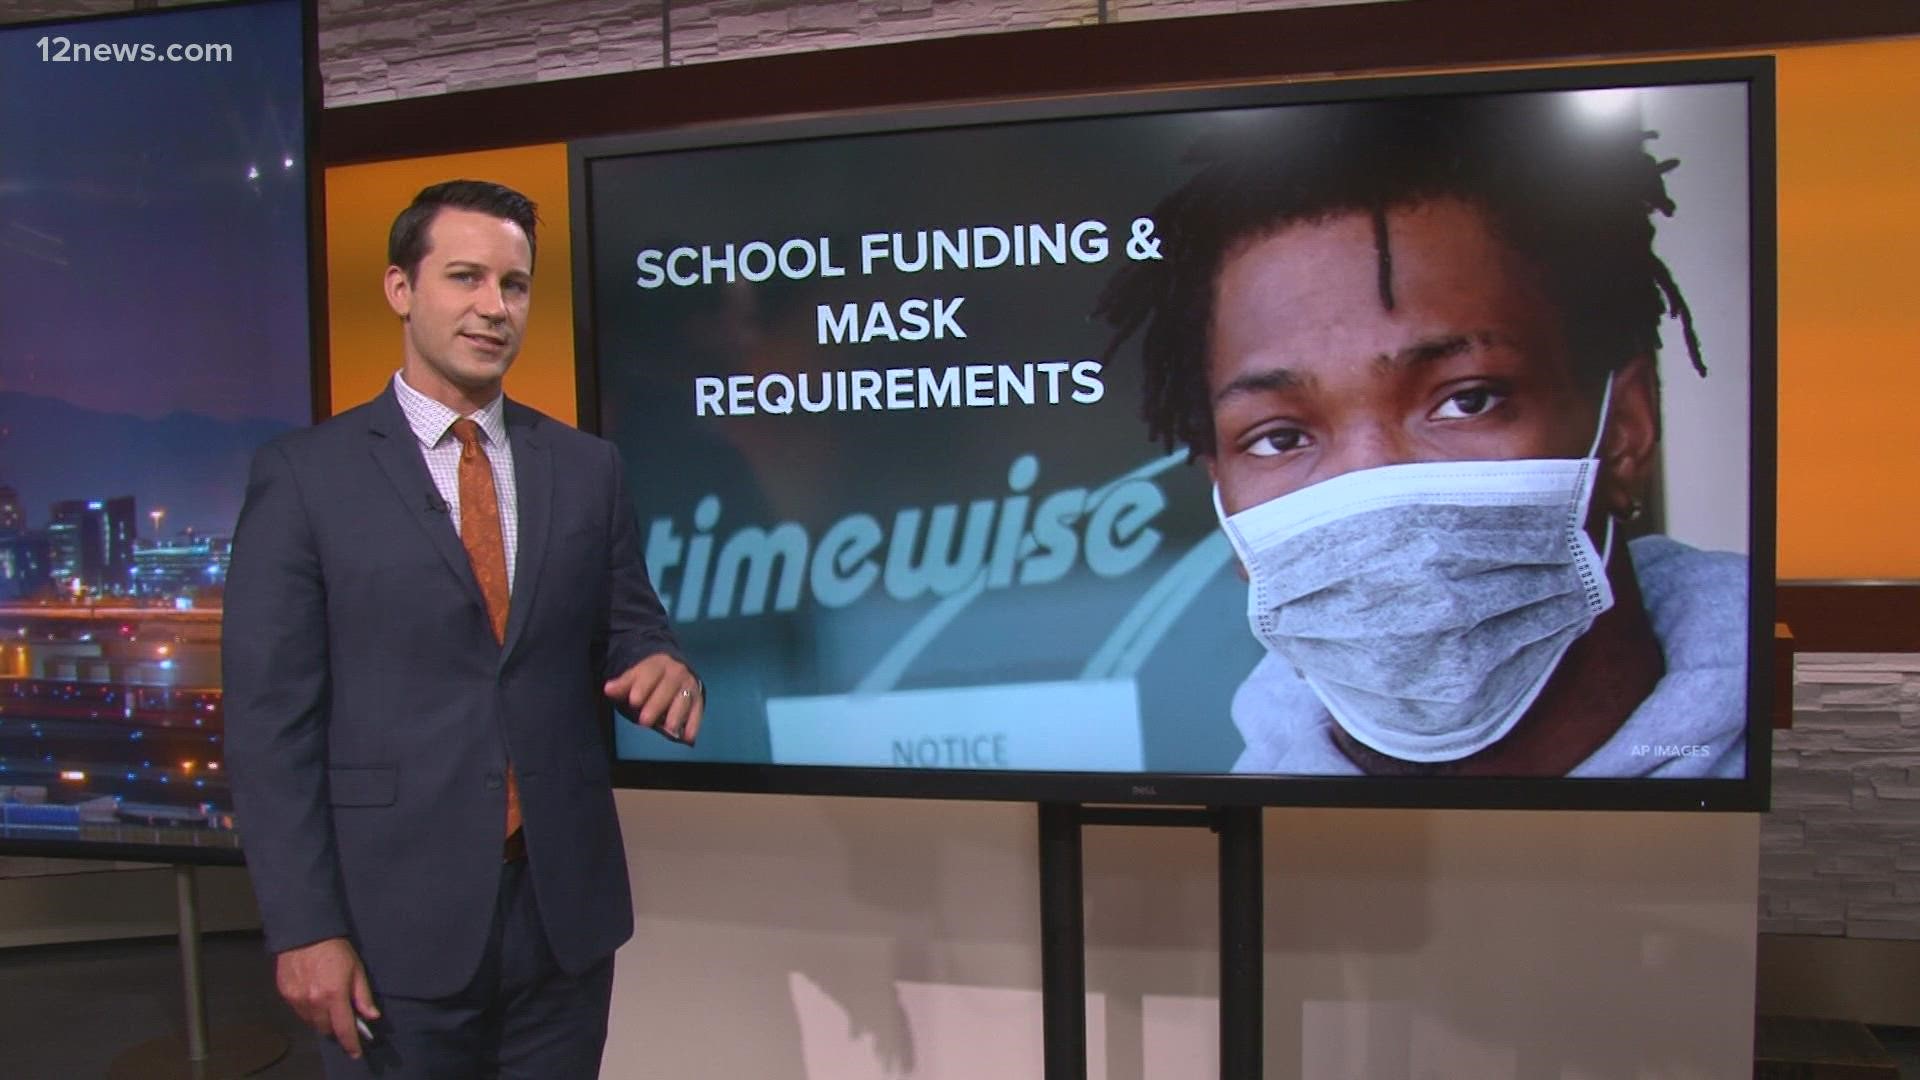 Should schools lose funding for requiring masks? Ryan Cody has the details on this latest education debate.